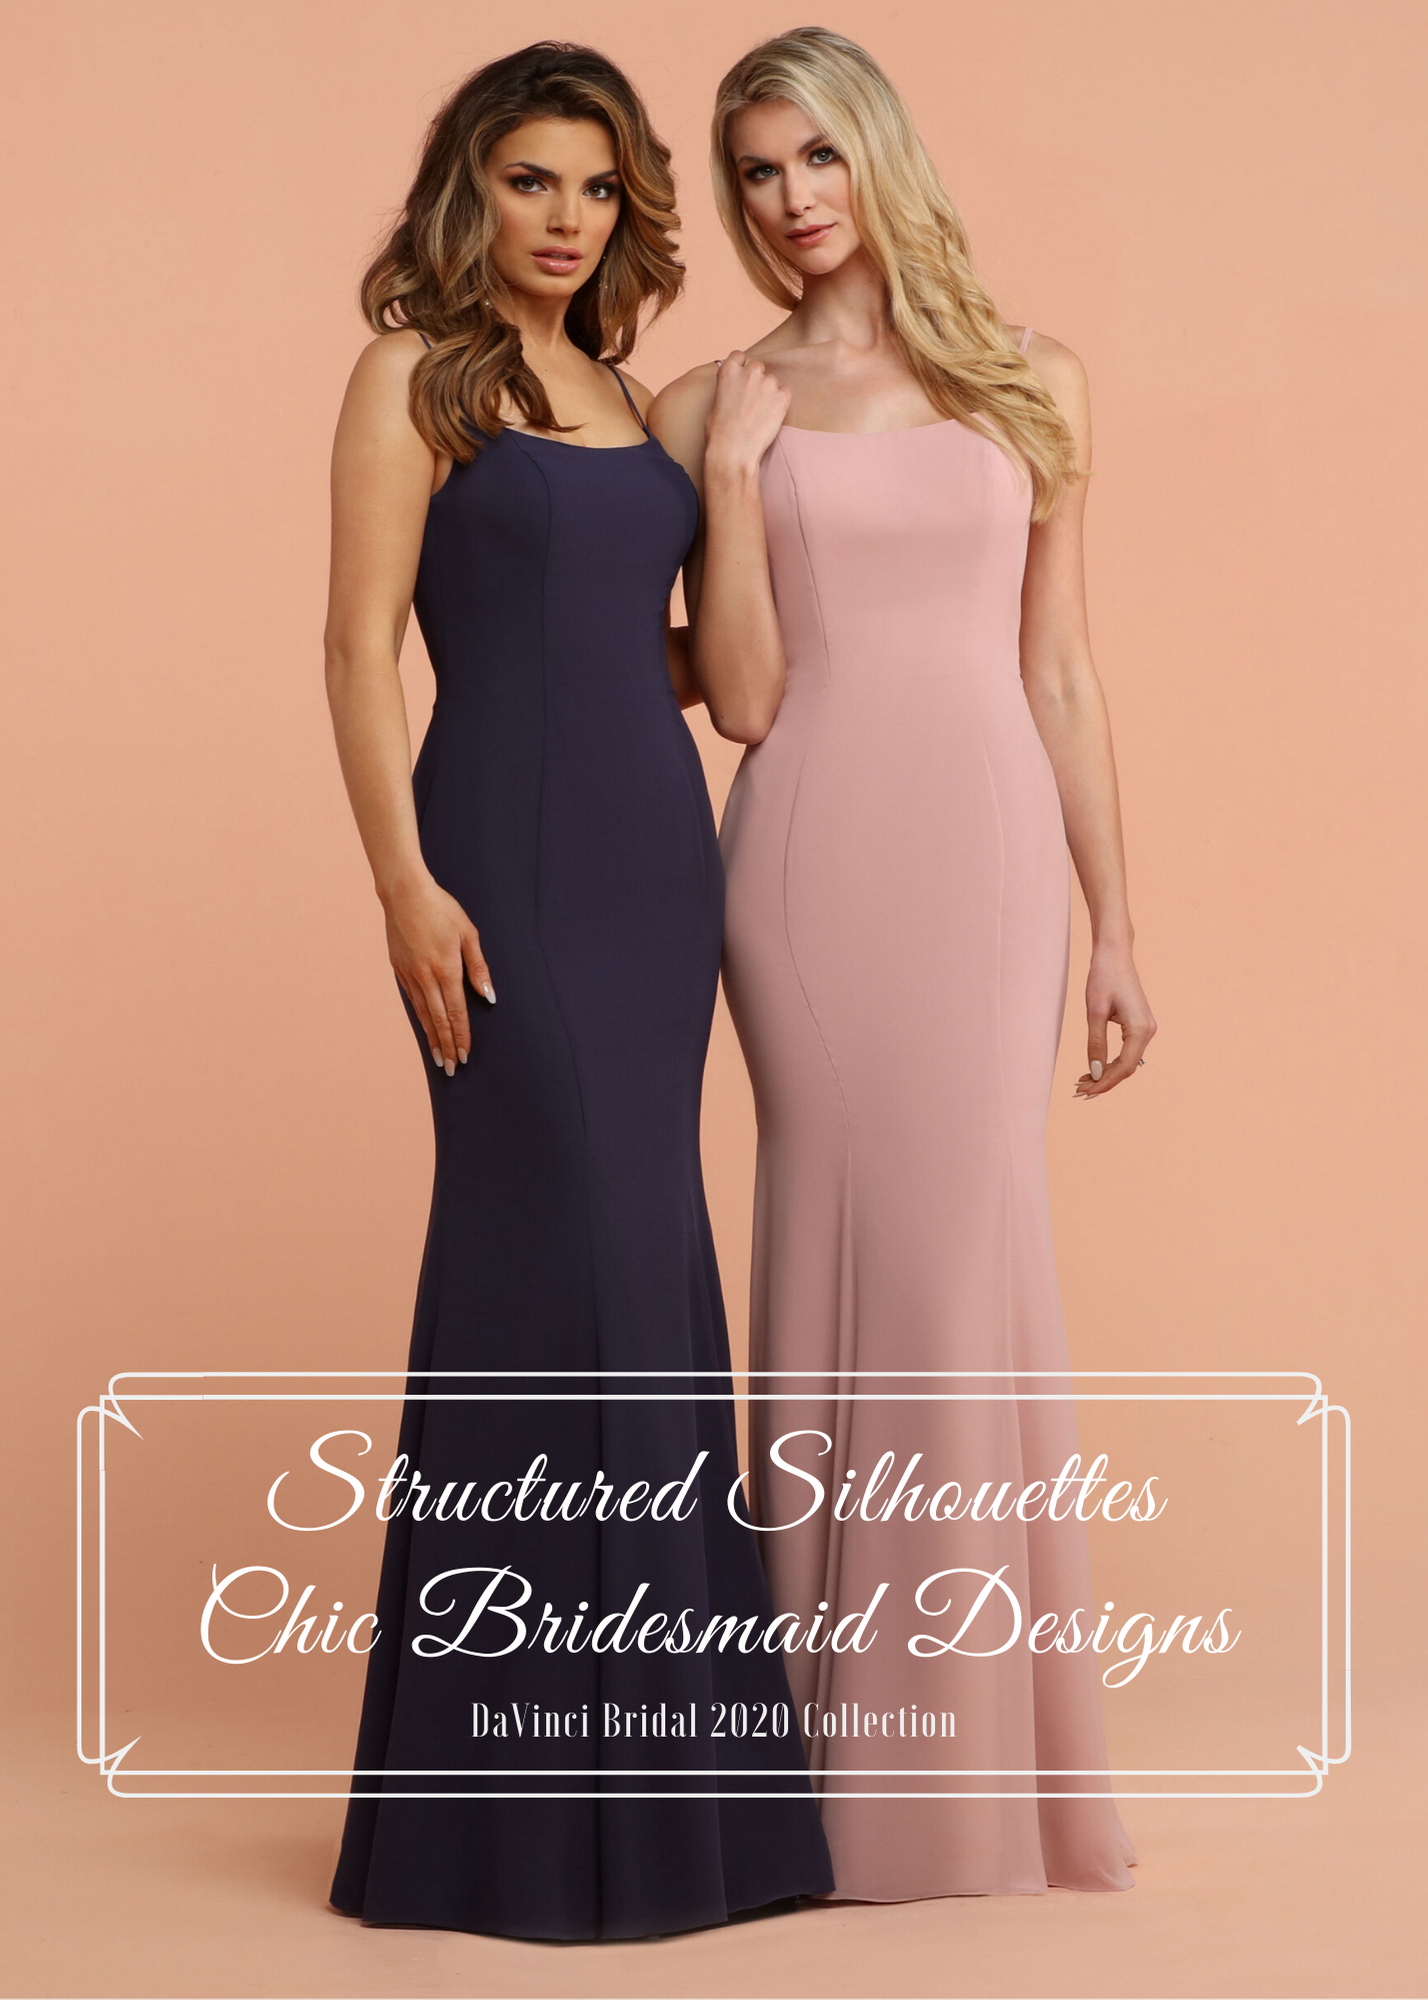 Structured Silhouette Bridesmaids Dresses for 2020